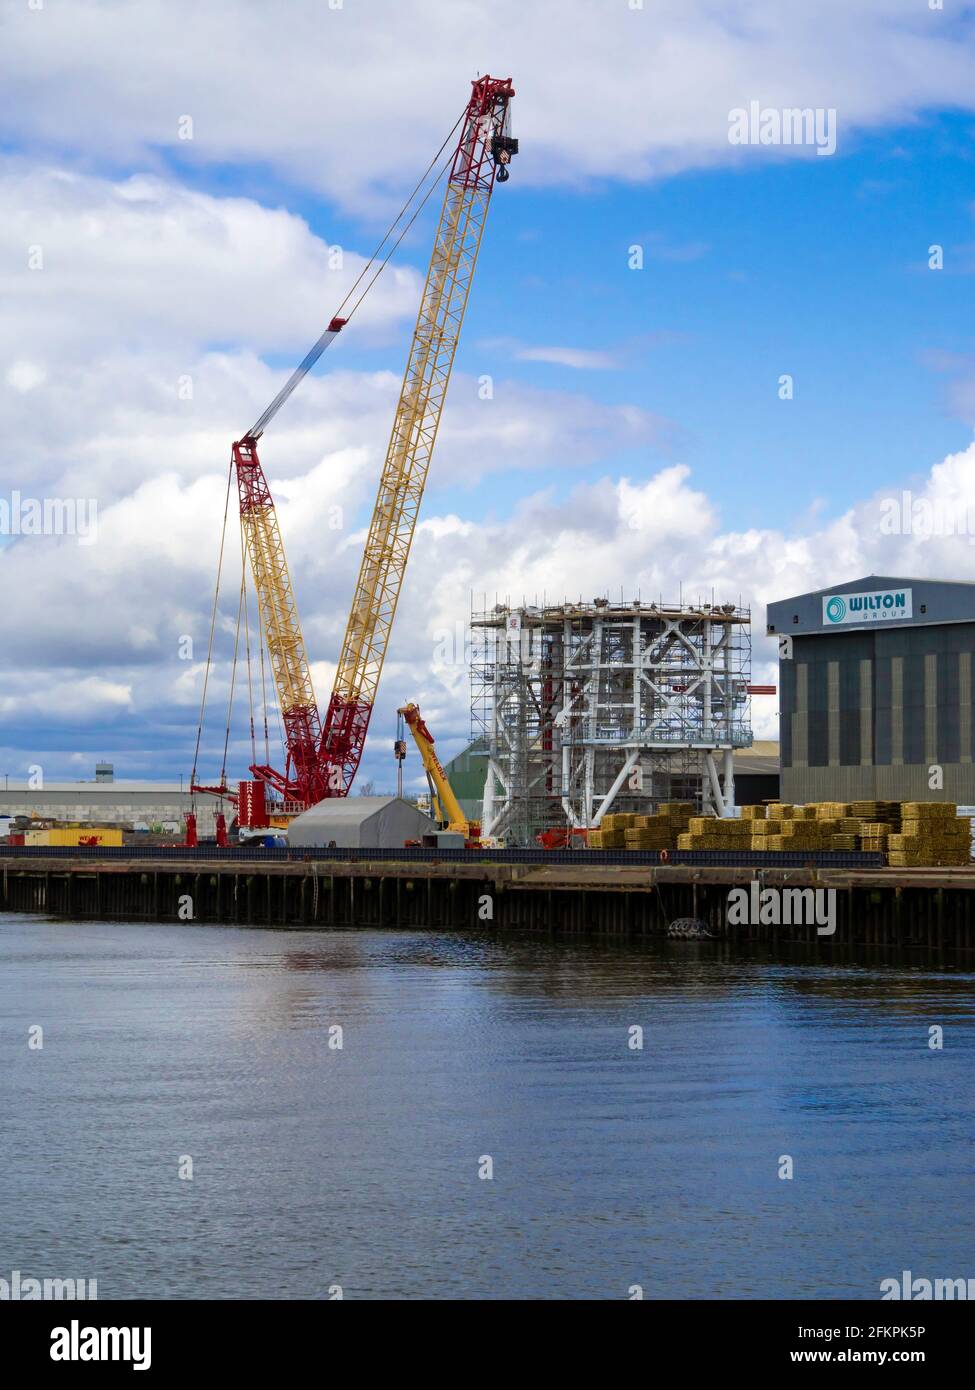 Large; mobile crane; mobile; crane; quayside; Wilton Group; Wilton; group; fabrication; yard; manufacture; manufacturing; white, subsea, structure, co Stock Photo